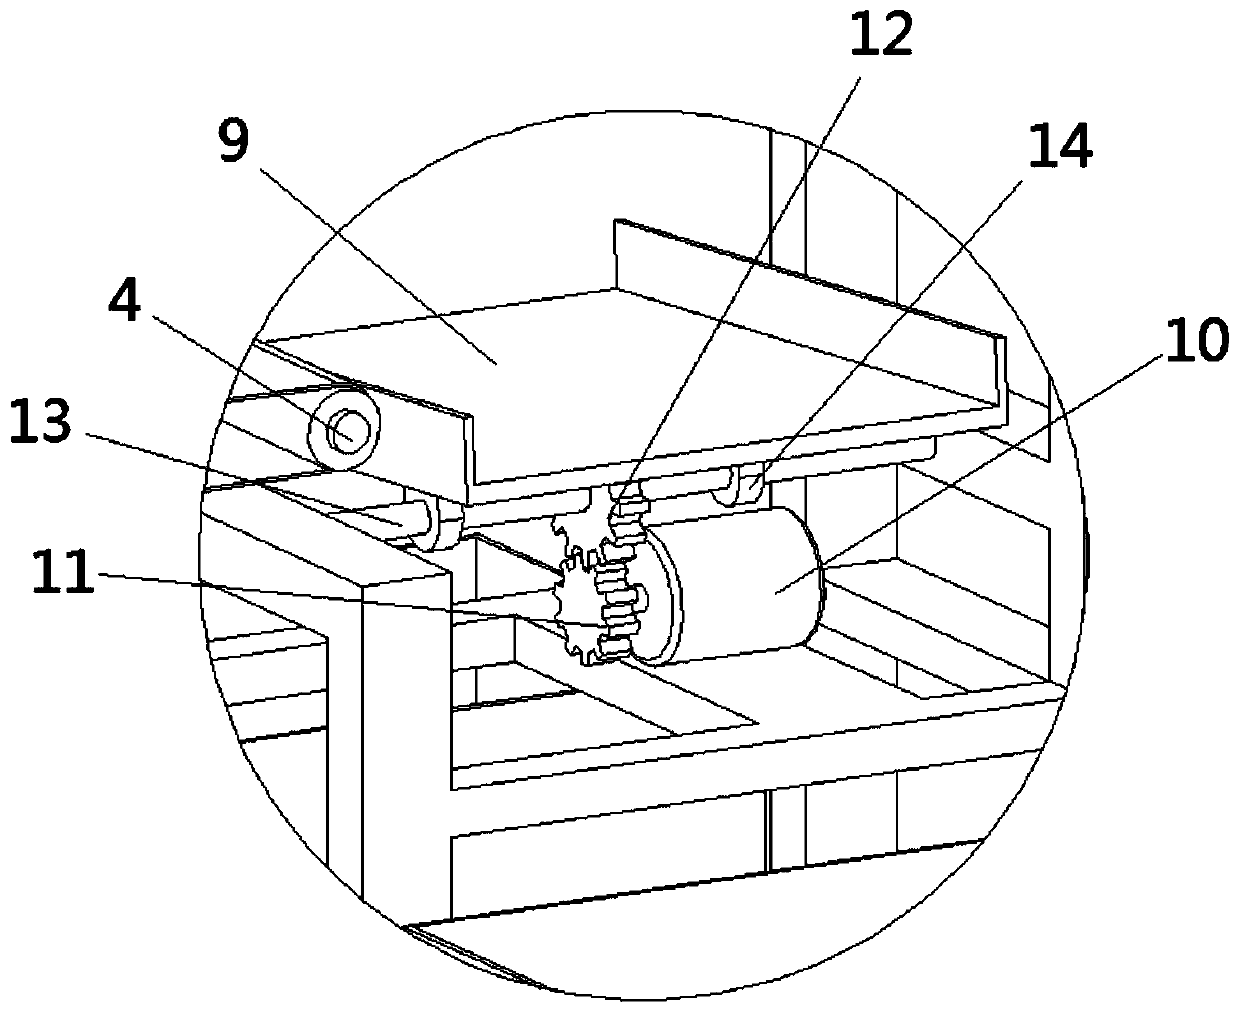 Conveying device for food detection